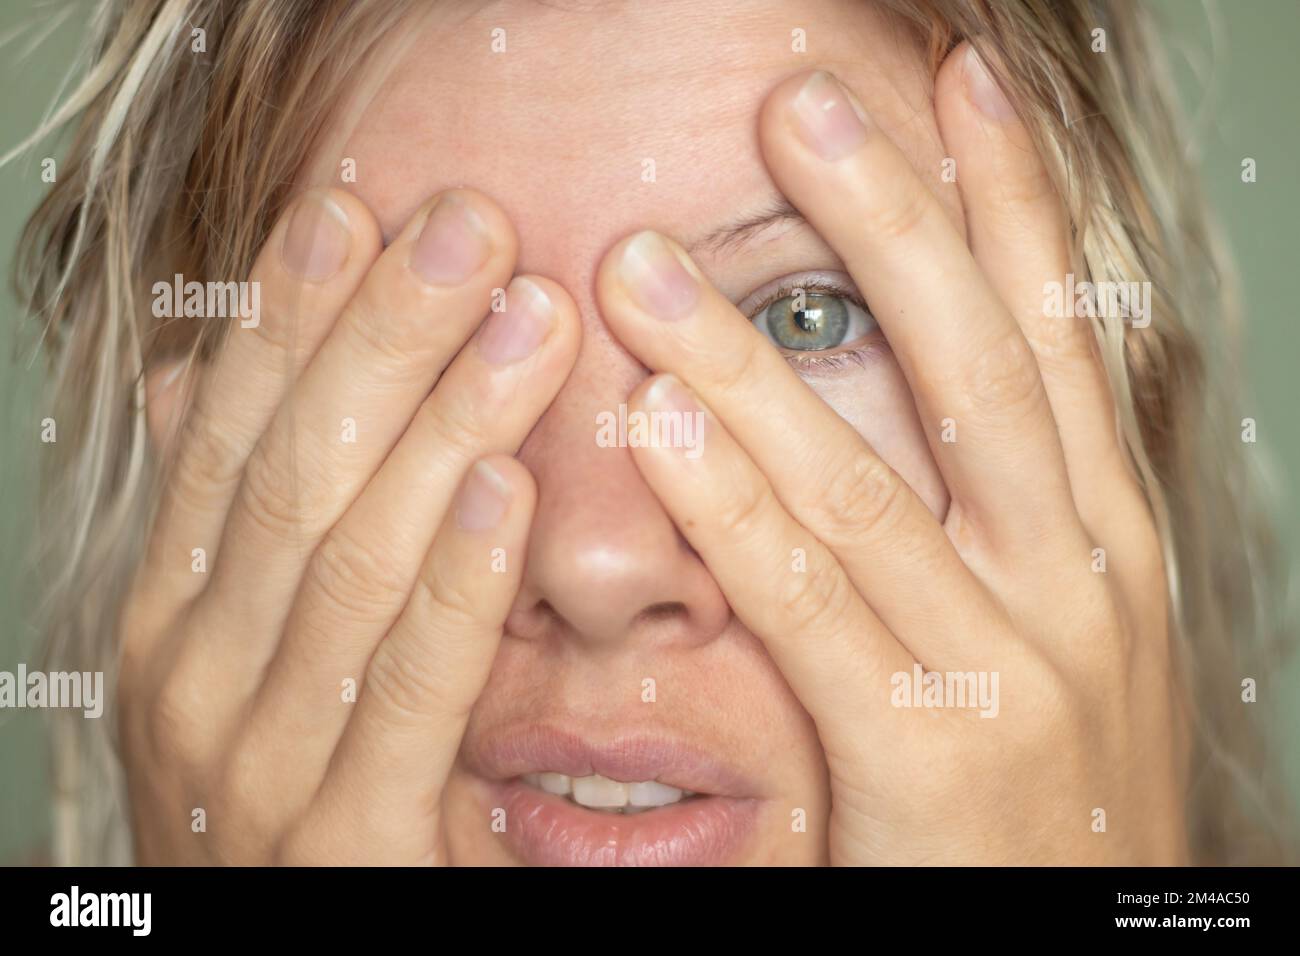 young girl covered her face with hands closeup portrait on an isolated background Stock Photo